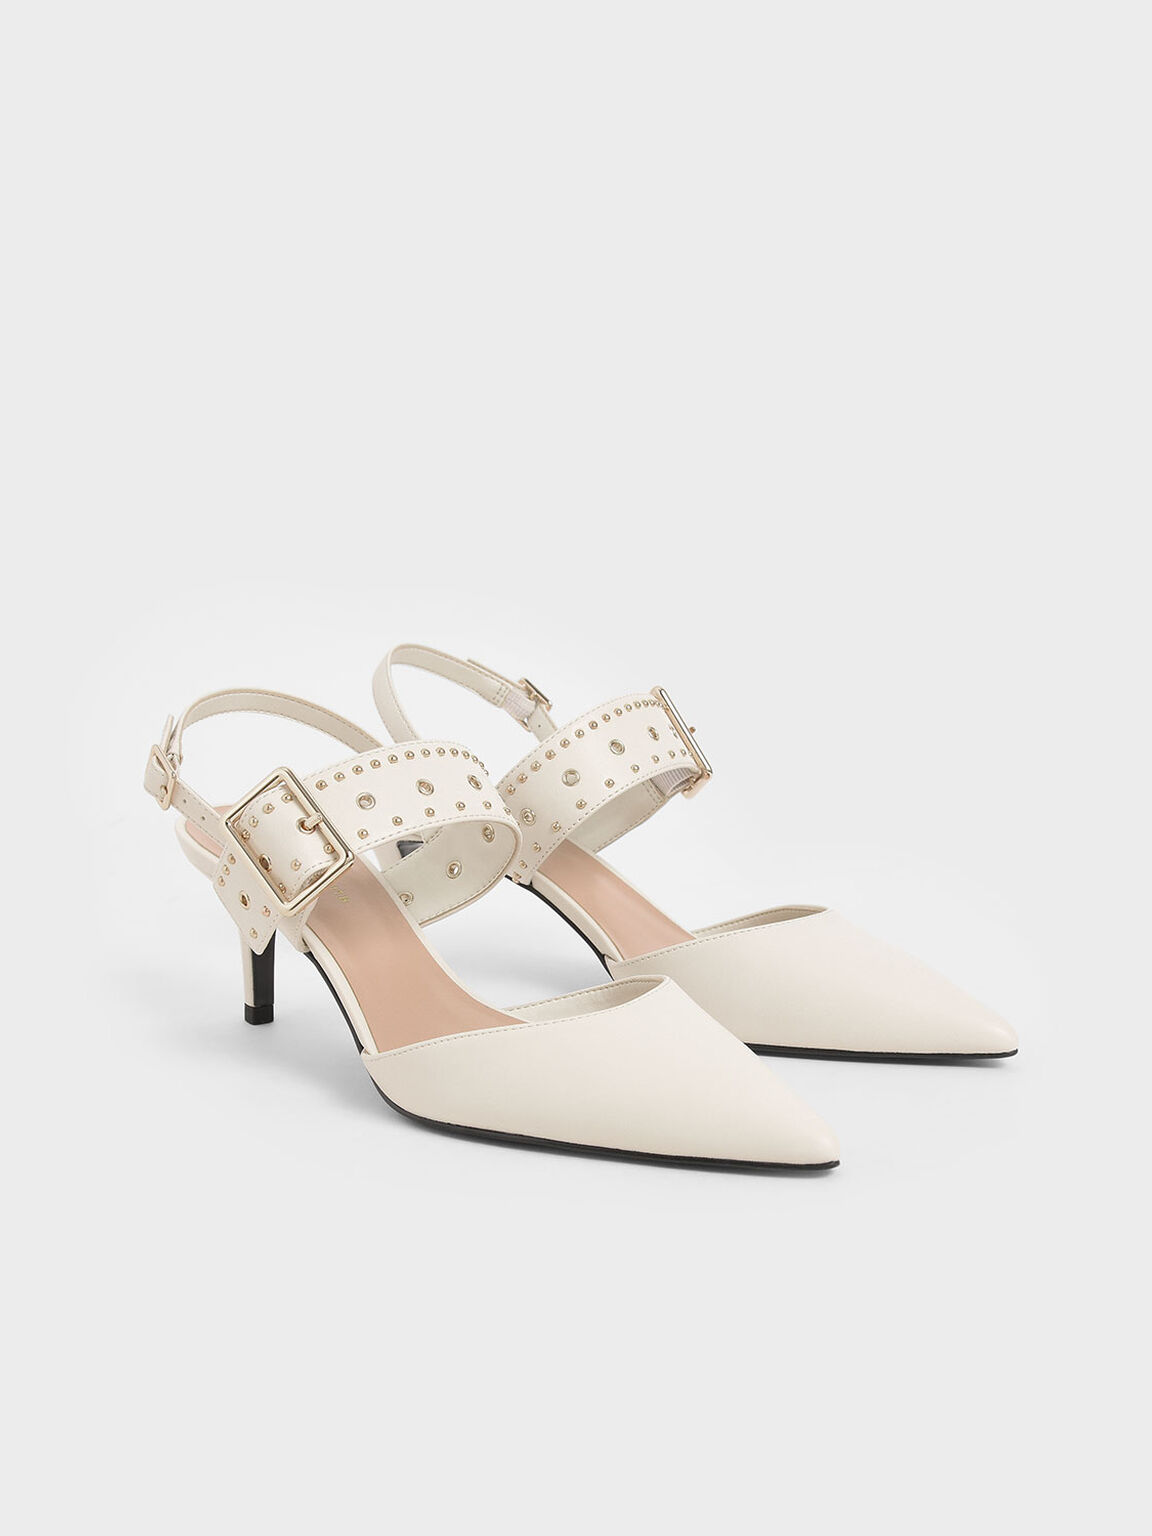 Charles And Keith Heels - CelesteChoo.com: Shoe Shopping at Charles ...